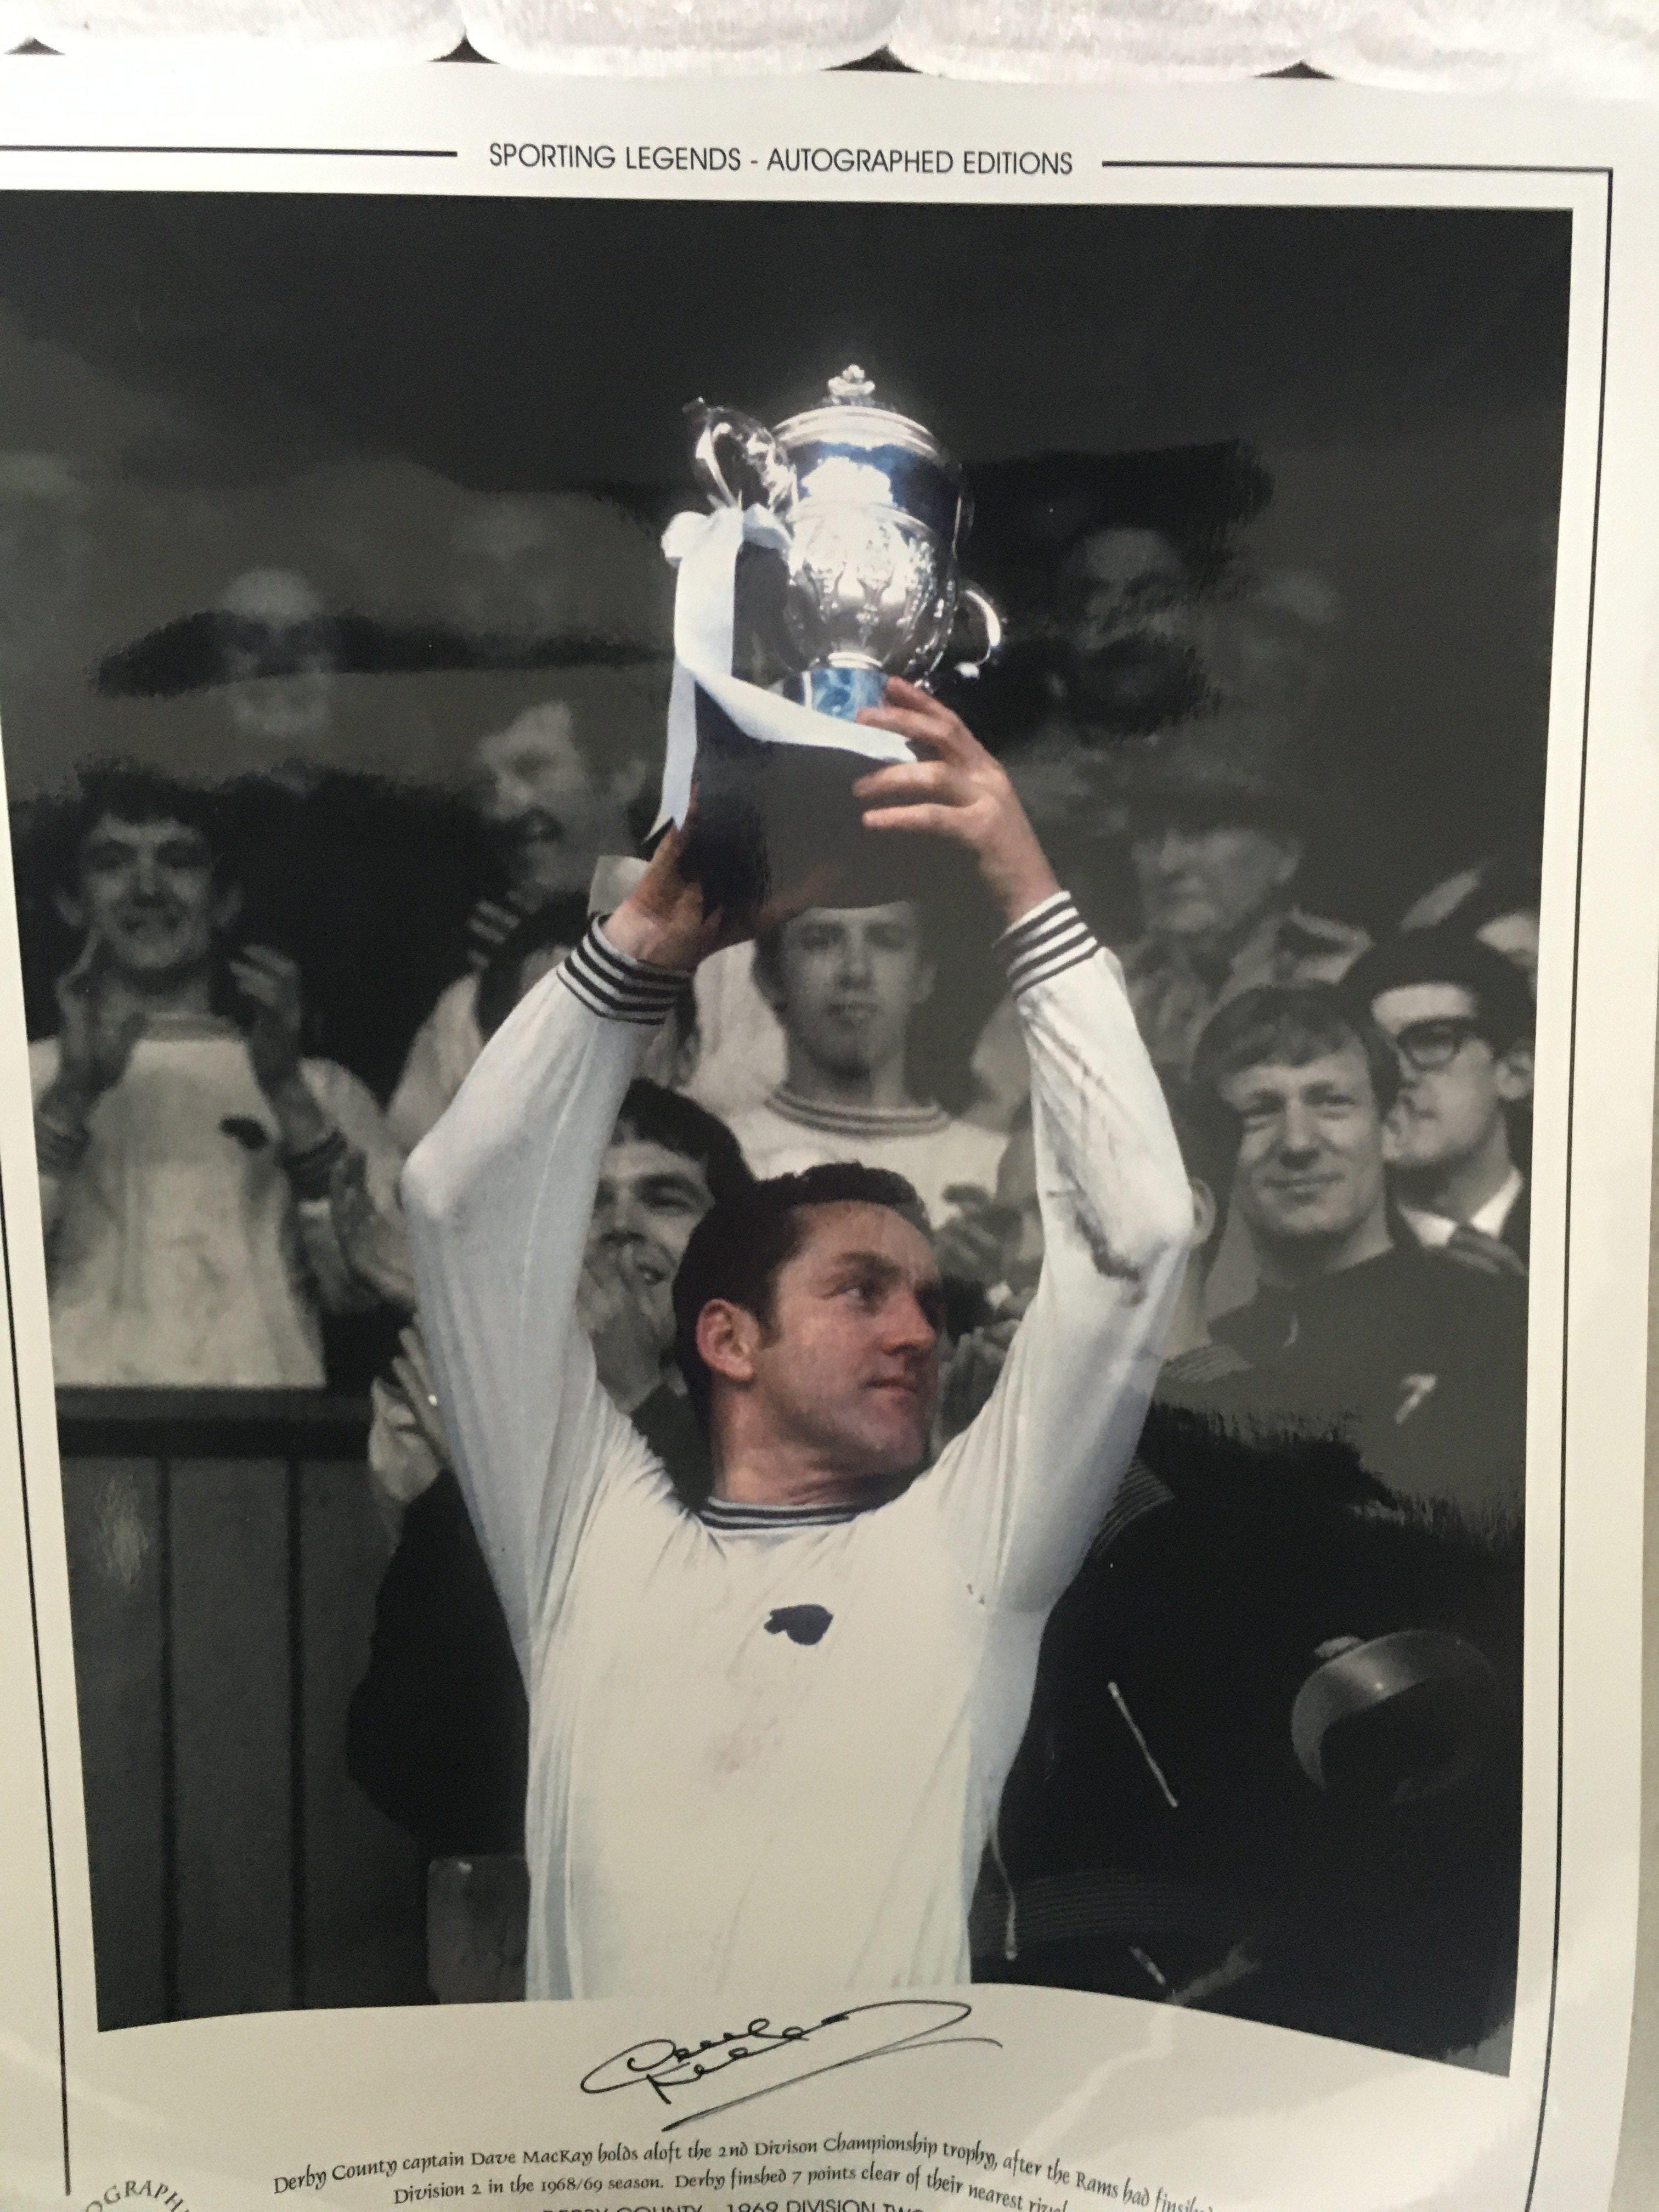 Derby County Legends Signed Football Photos: Some - Image 2 of 2